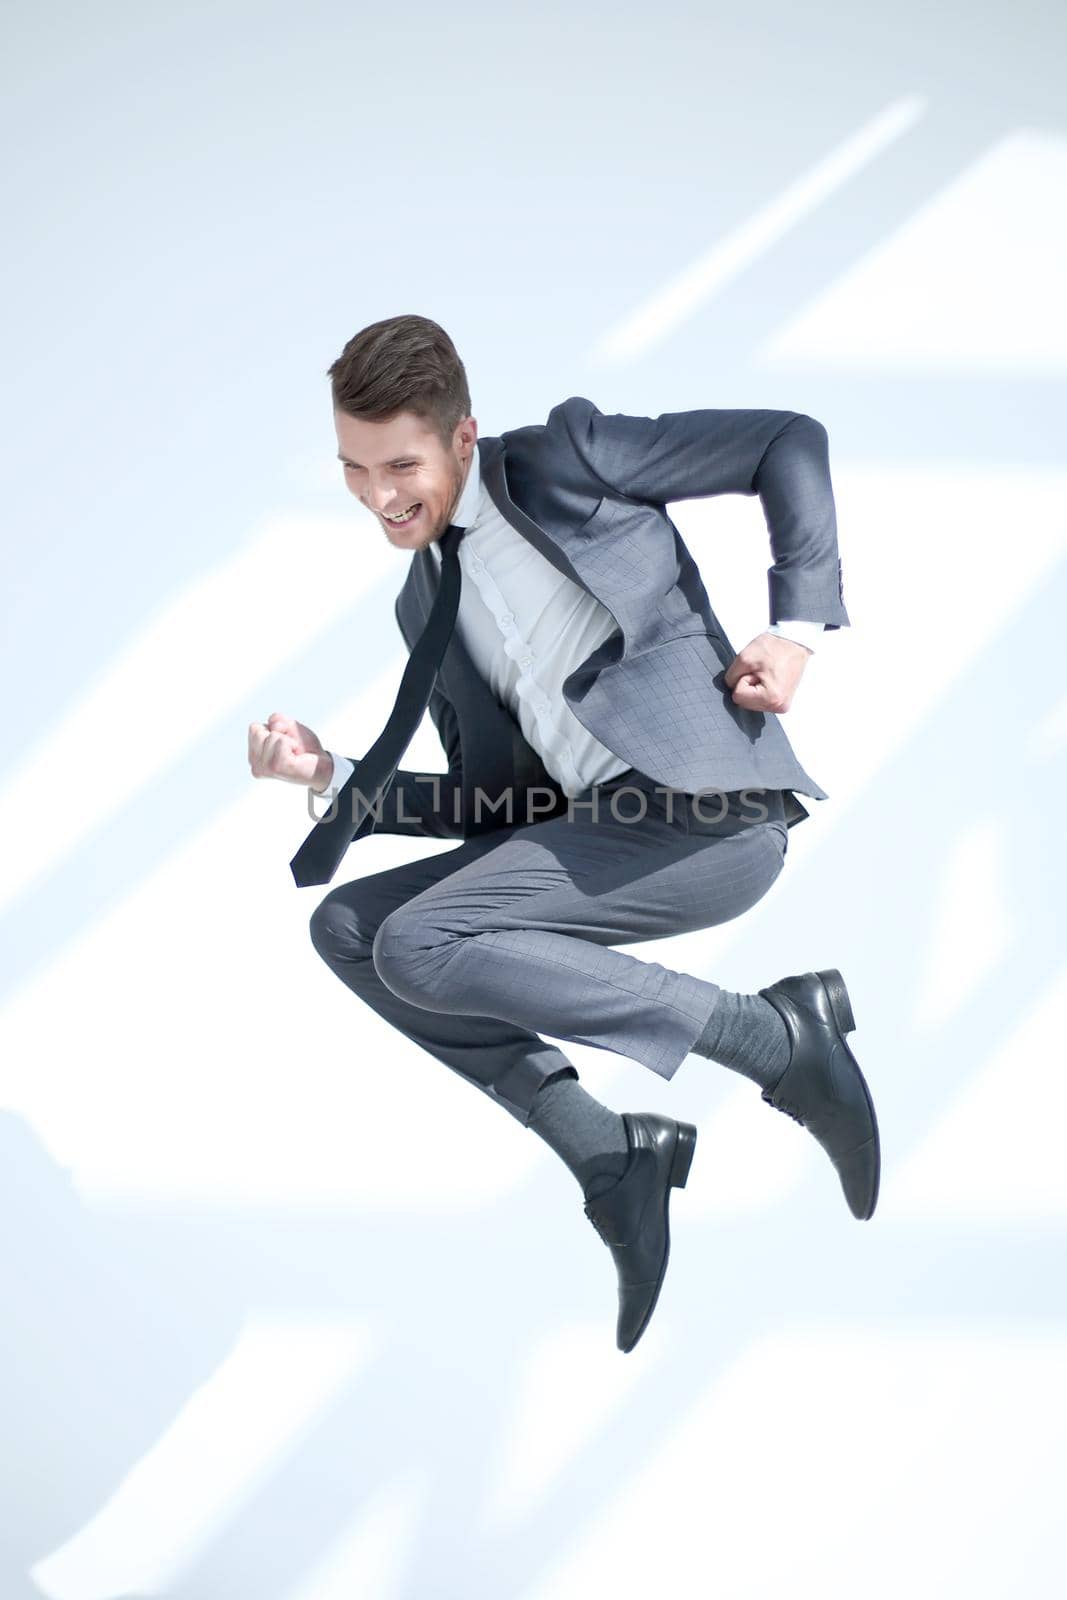 Full-length jump of a young man jumping with an open mouth, isol by asdf